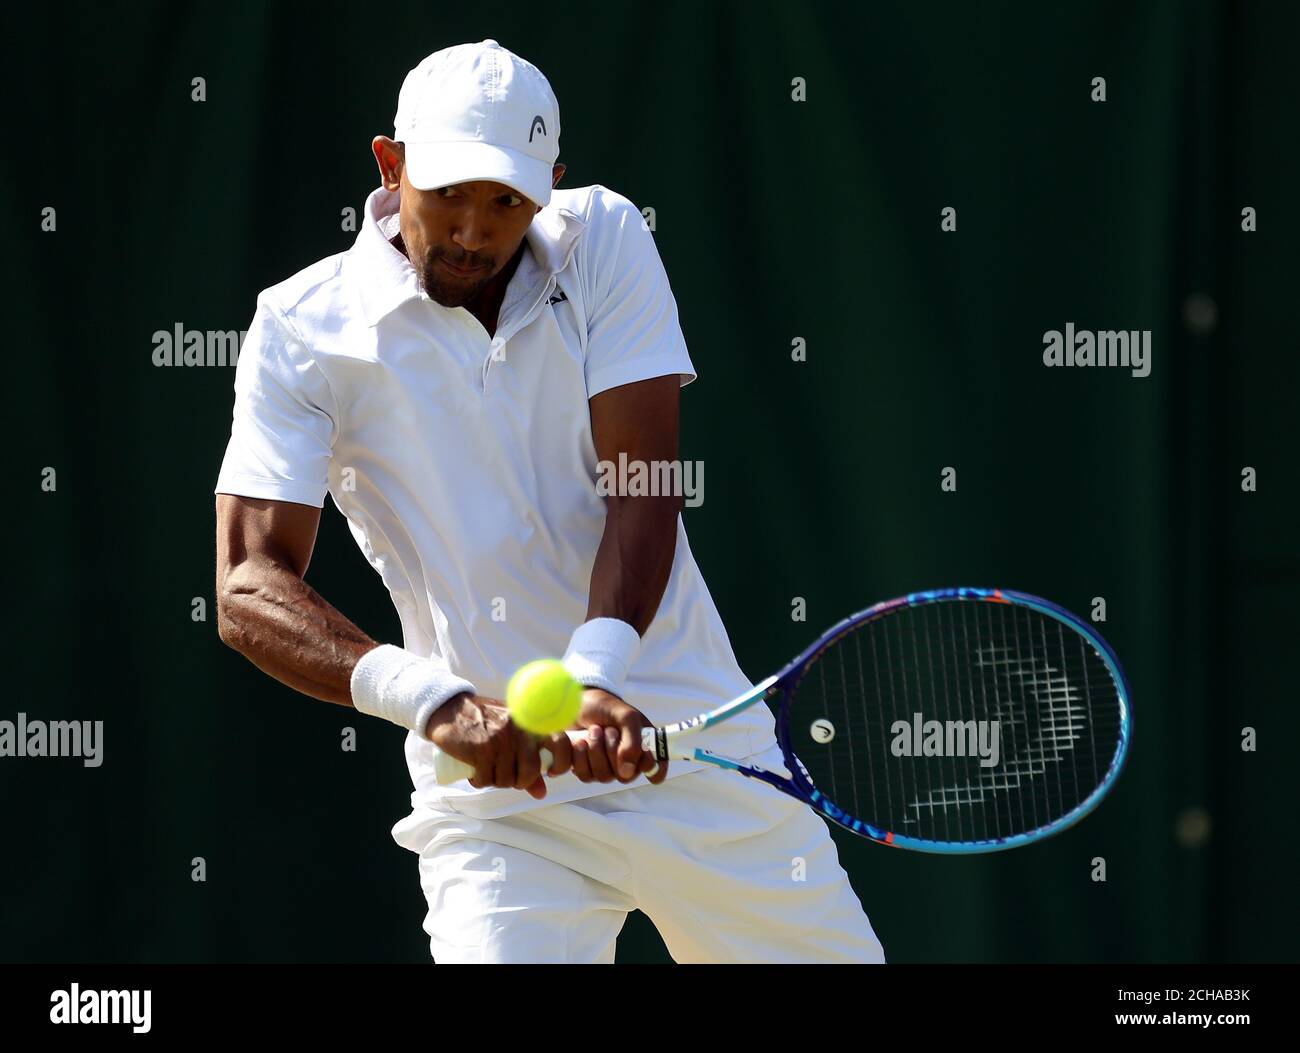 Raven Klaasen in action during his doubles match with Rajeev Ram on day  nine of the Wimbledon Championships at the All England Lawn Tennis and  Croquet Club, Wimbledon Stock Photo - Alamy